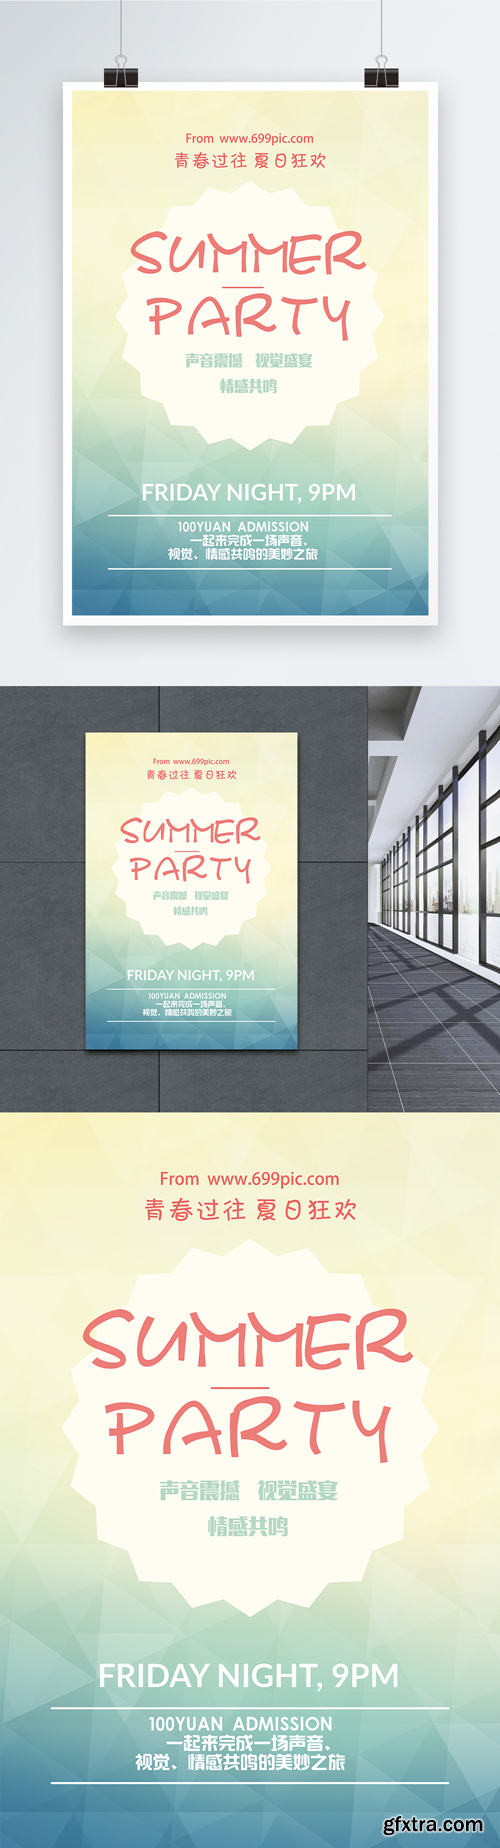 summer music party posters